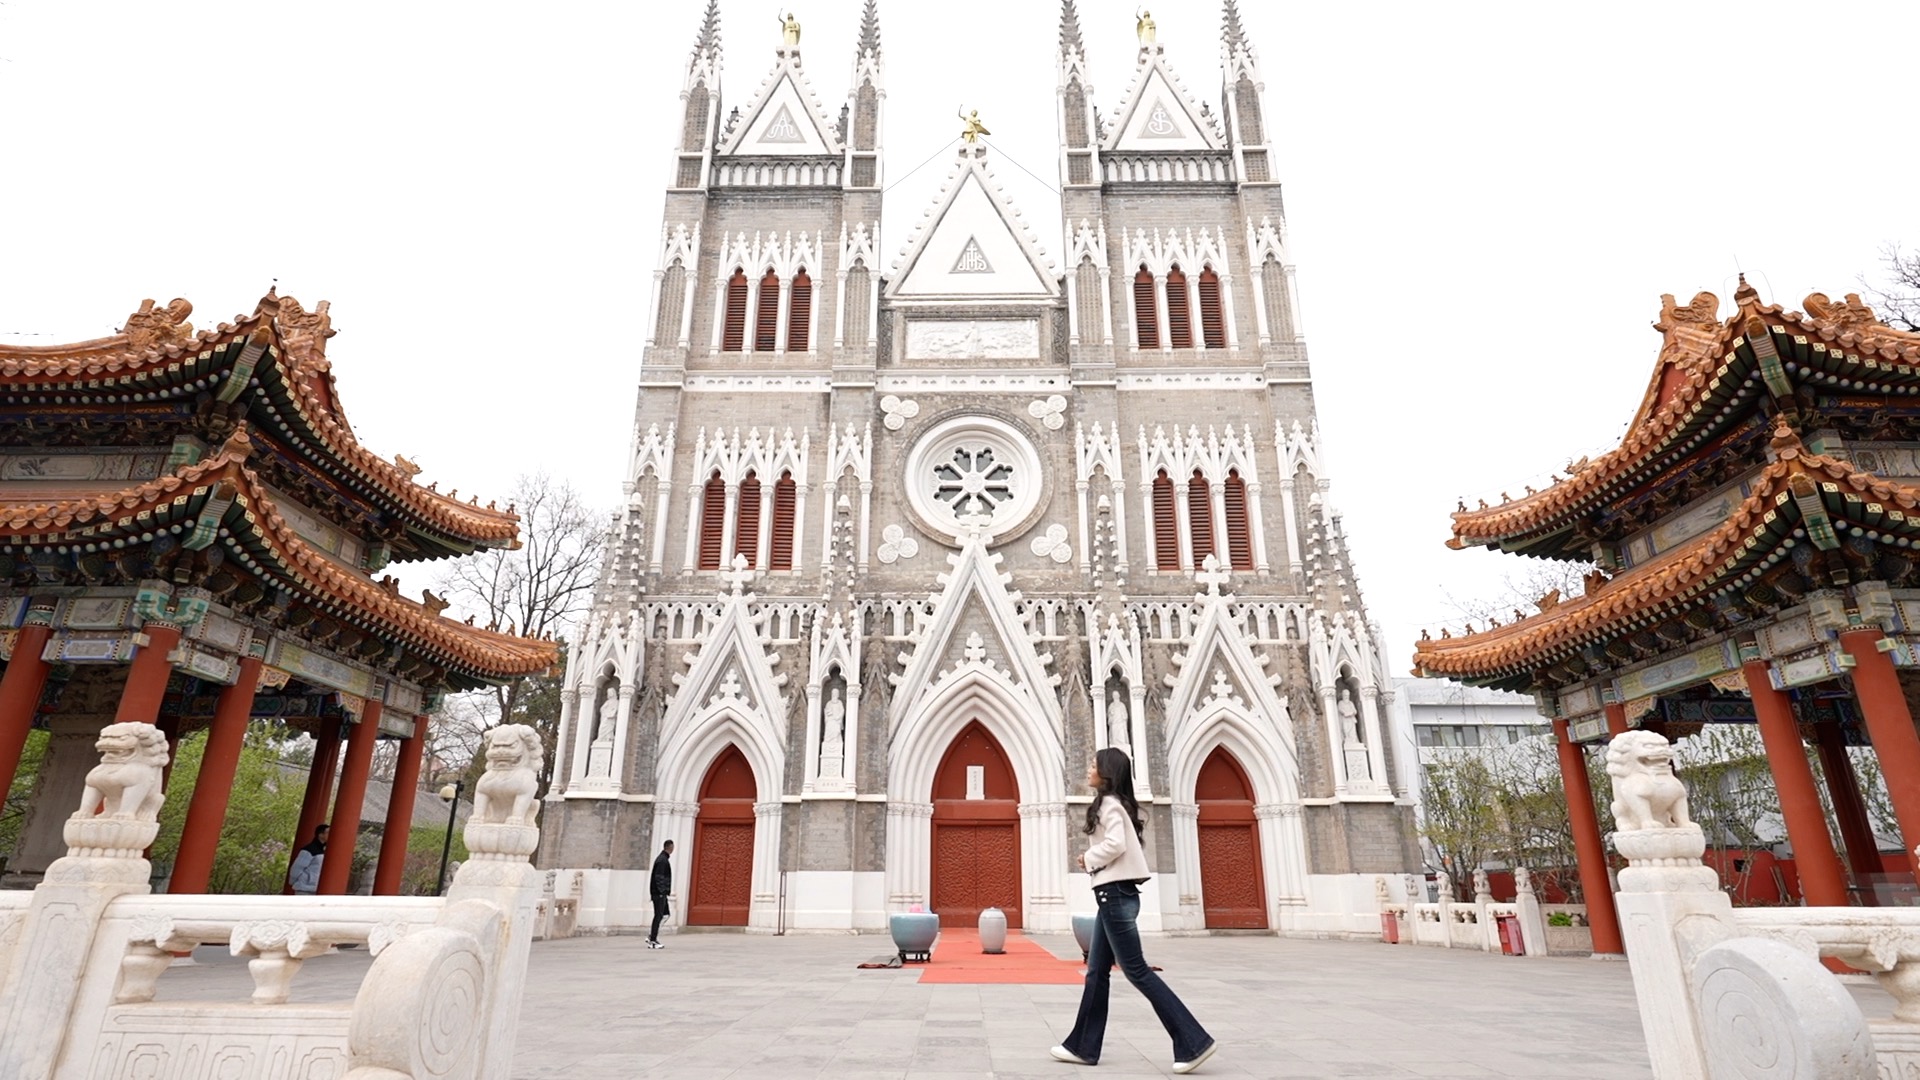 Xishiku Catholic Church sees a blend of Chinese and Gothic architecture styles. /CGTN